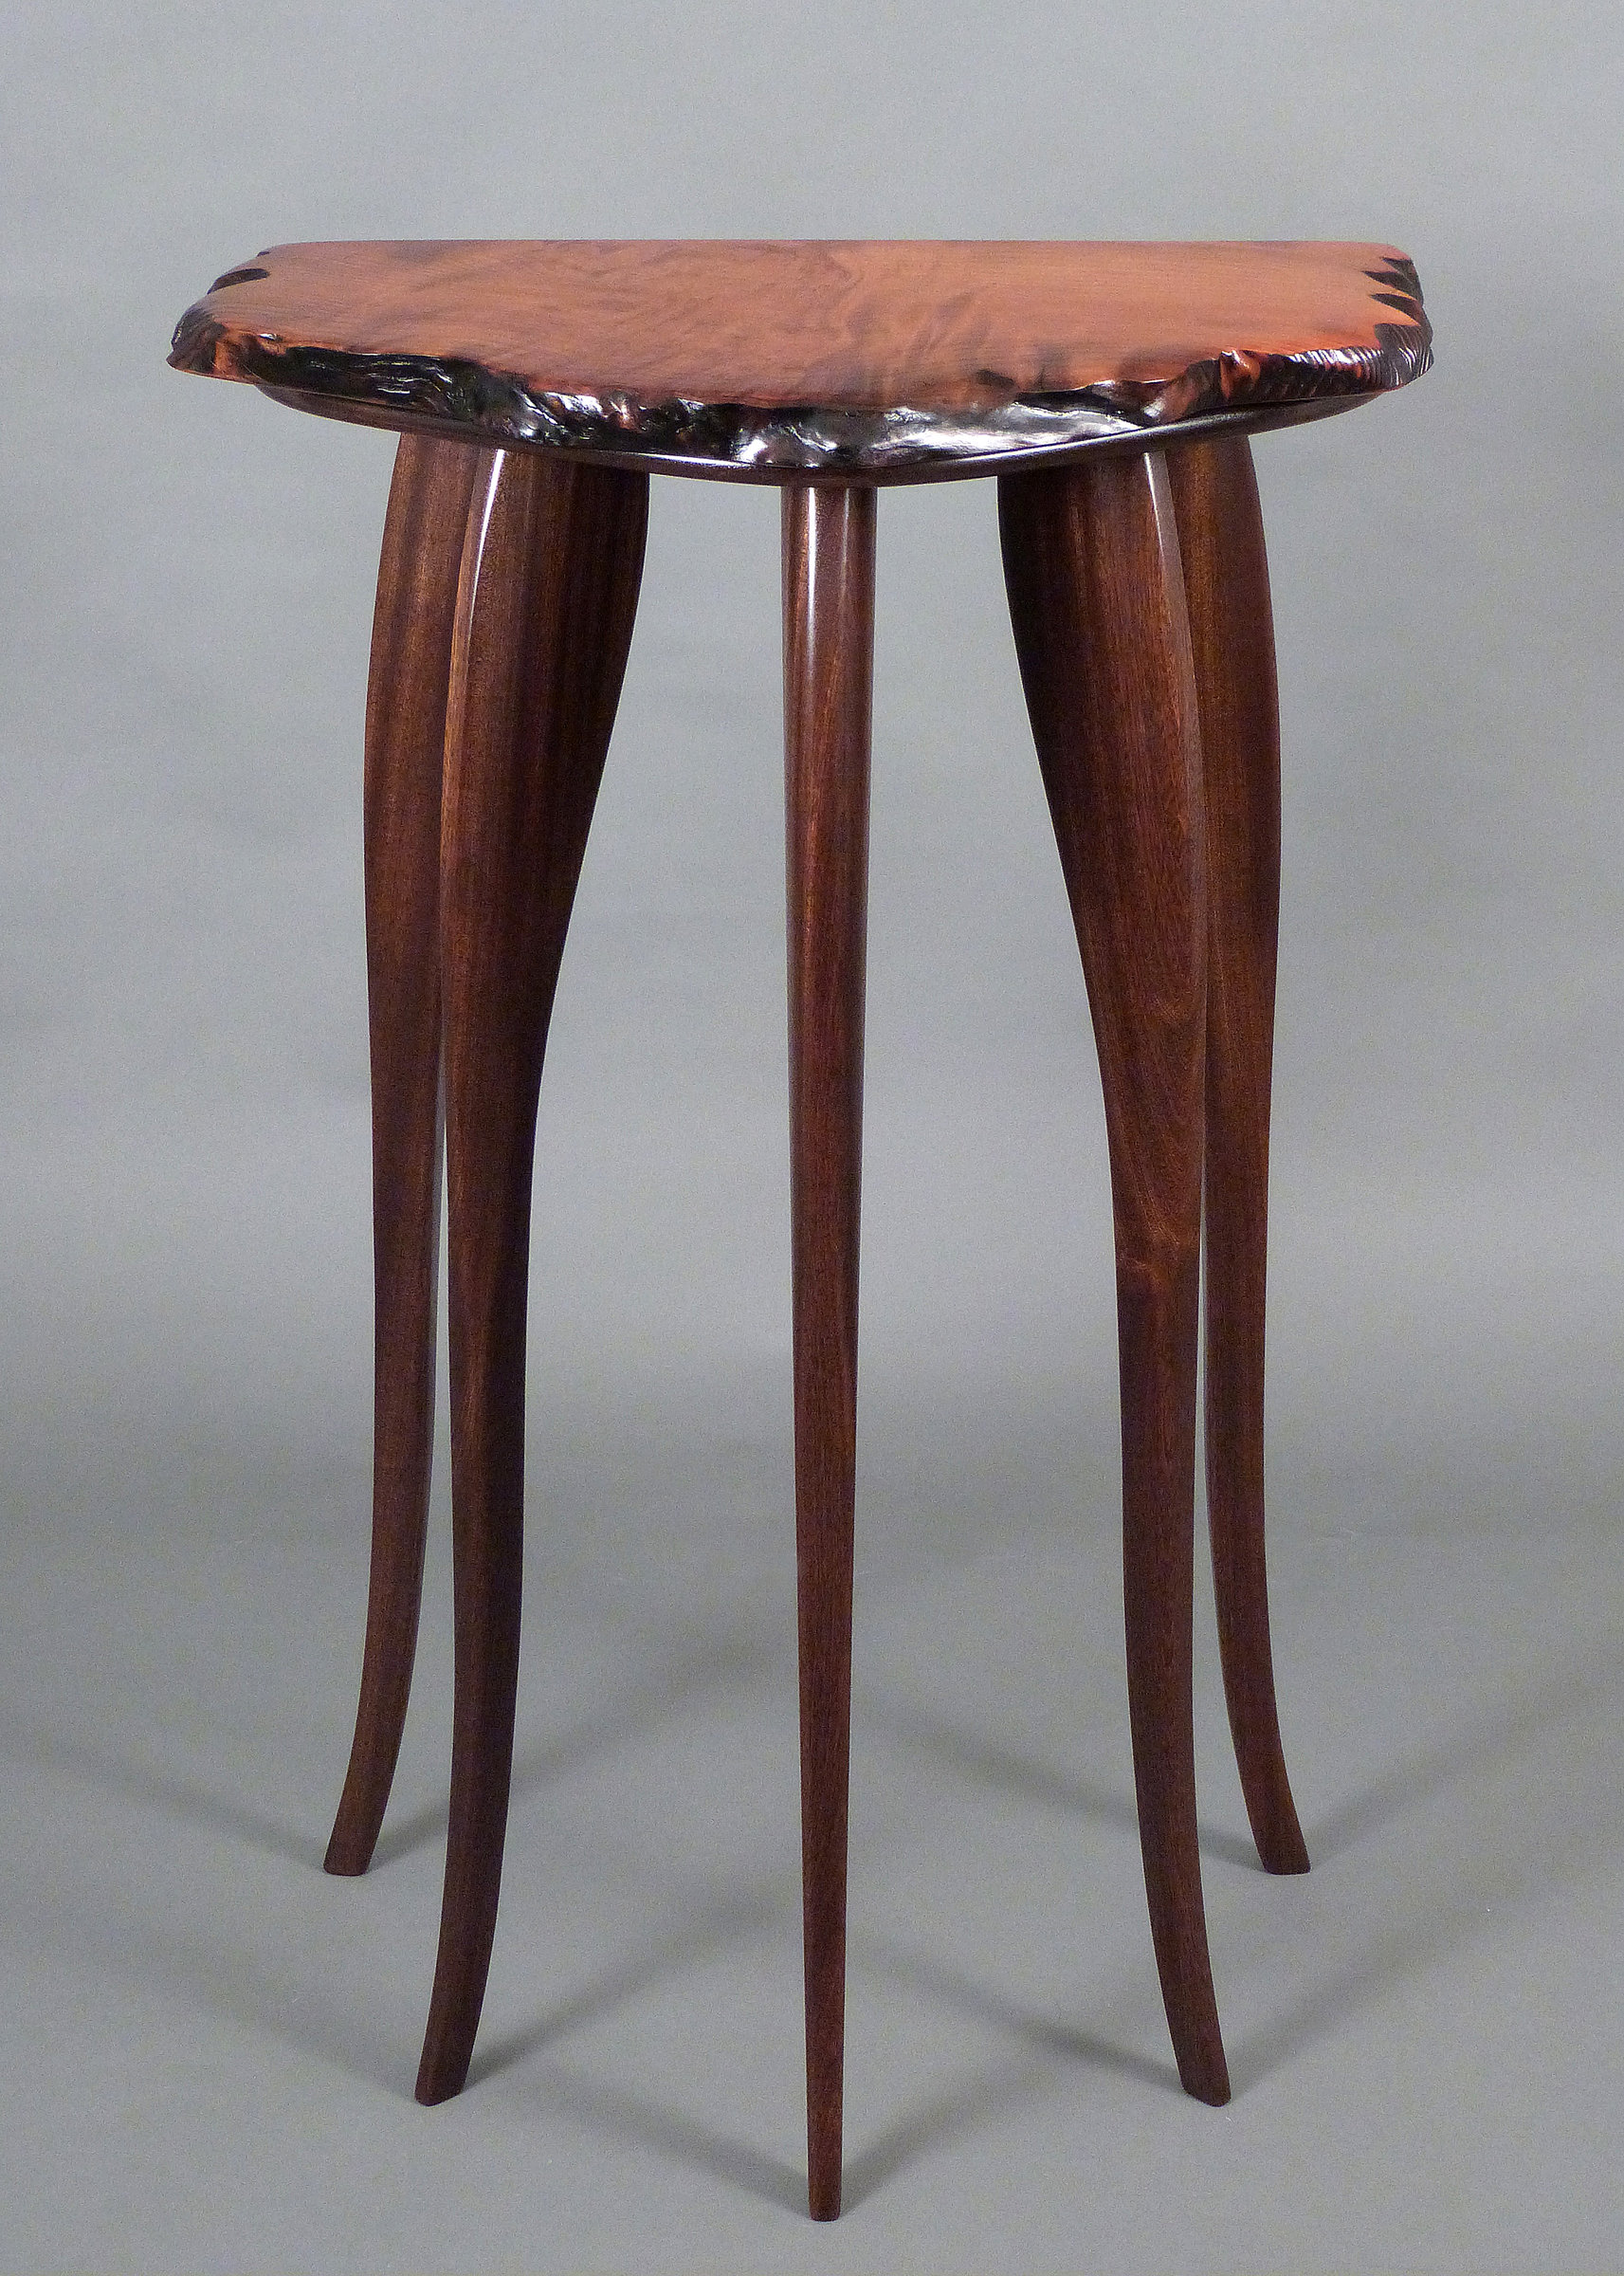 Tall, Dark, and Handsome by Bill Palmer (Wood Pedestal Table) | Artful Home